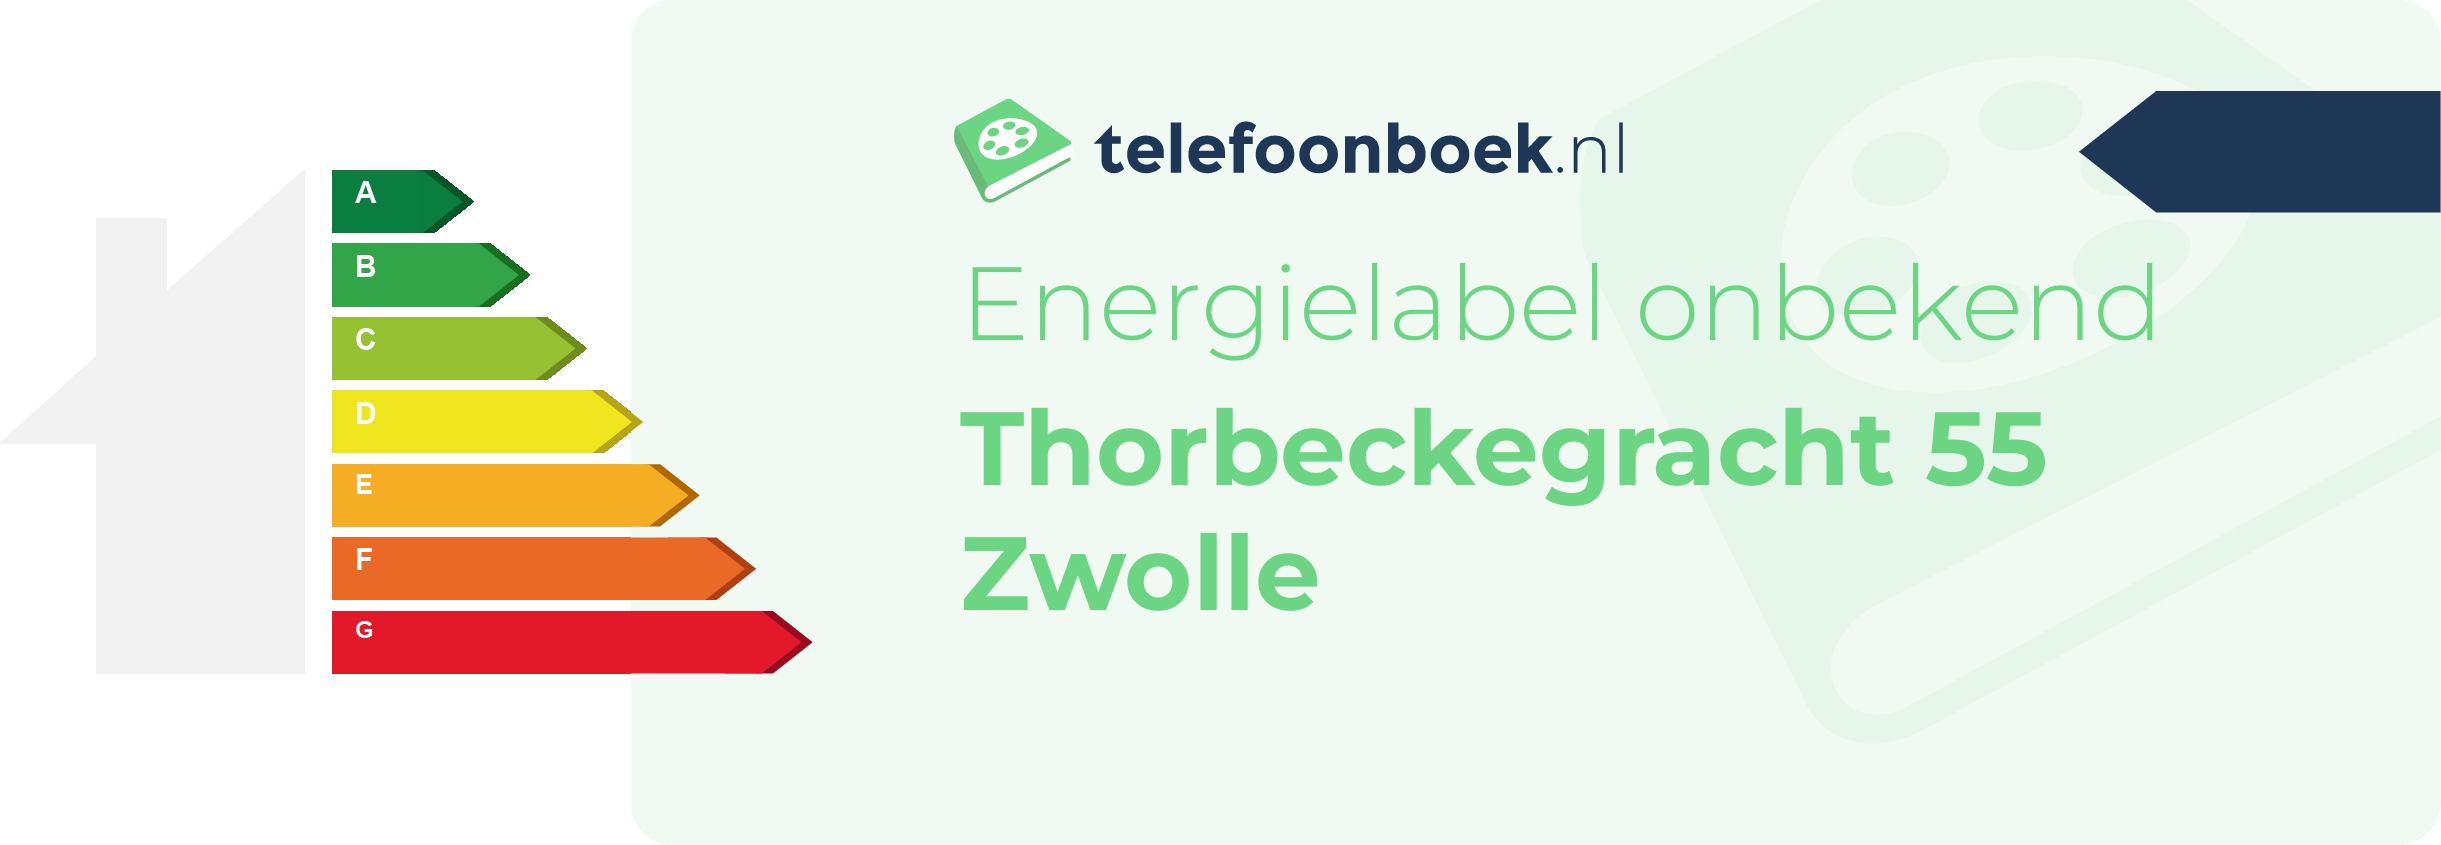 Energielabel Thorbeckegracht 55 Zwolle